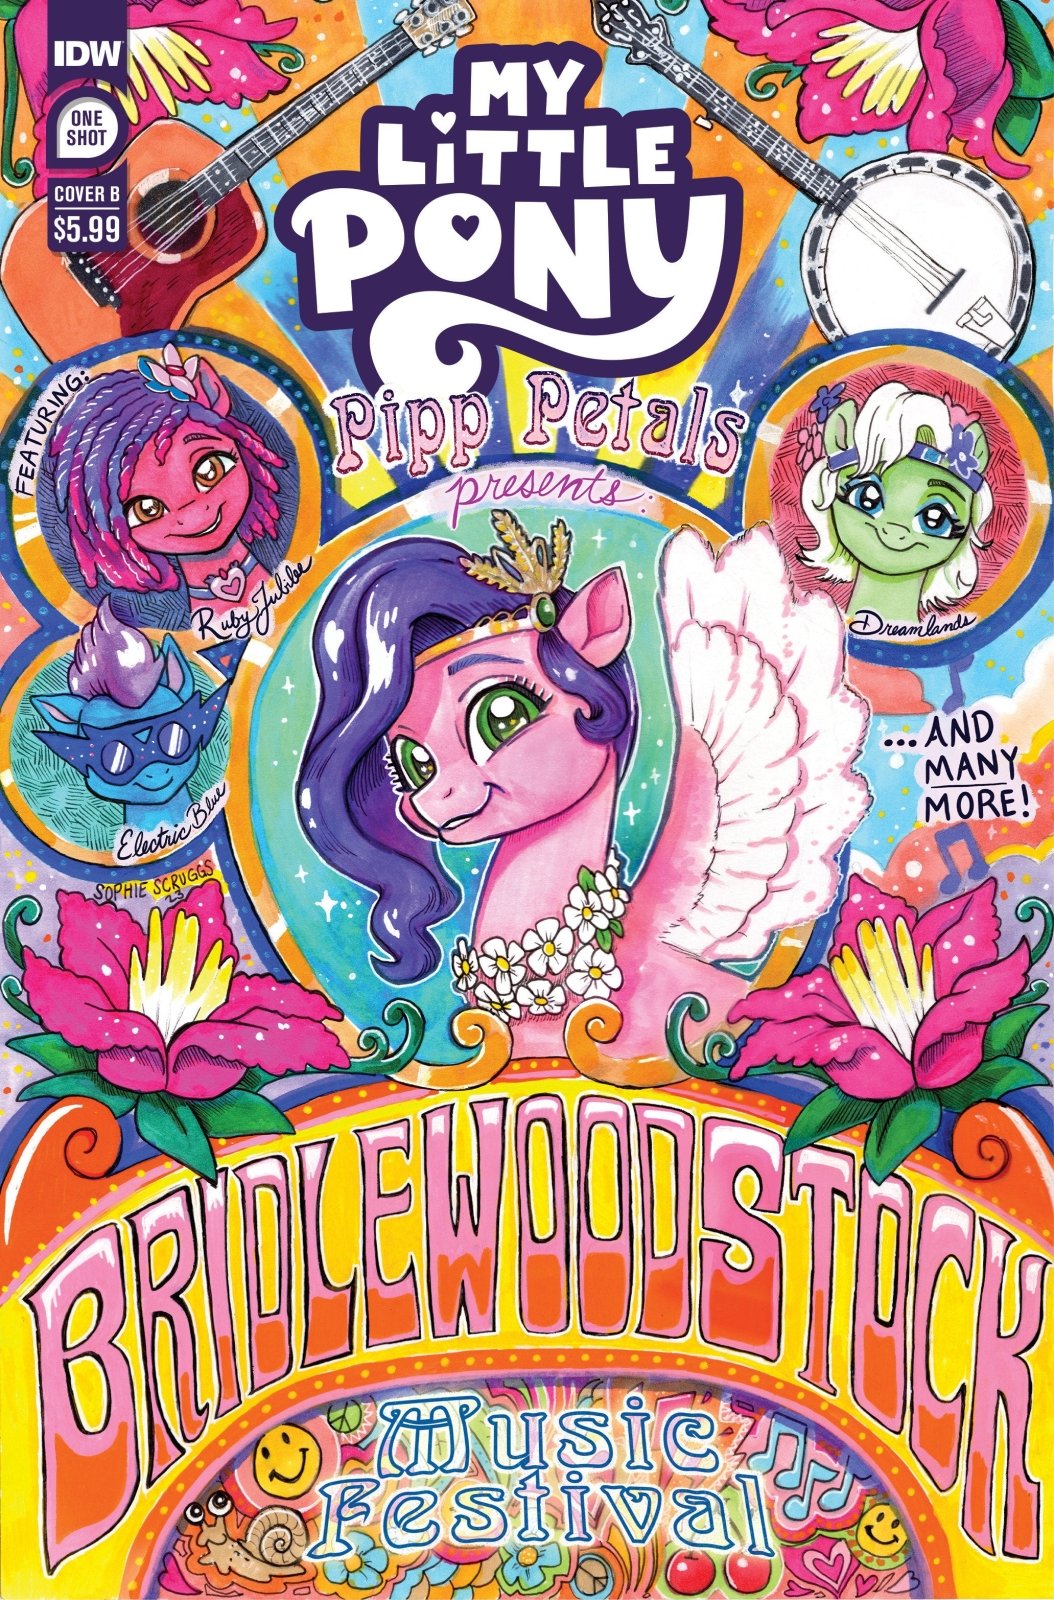 My Little Pony: Bridlewoodstock Variant B (Scruggs) - The Fourth Place